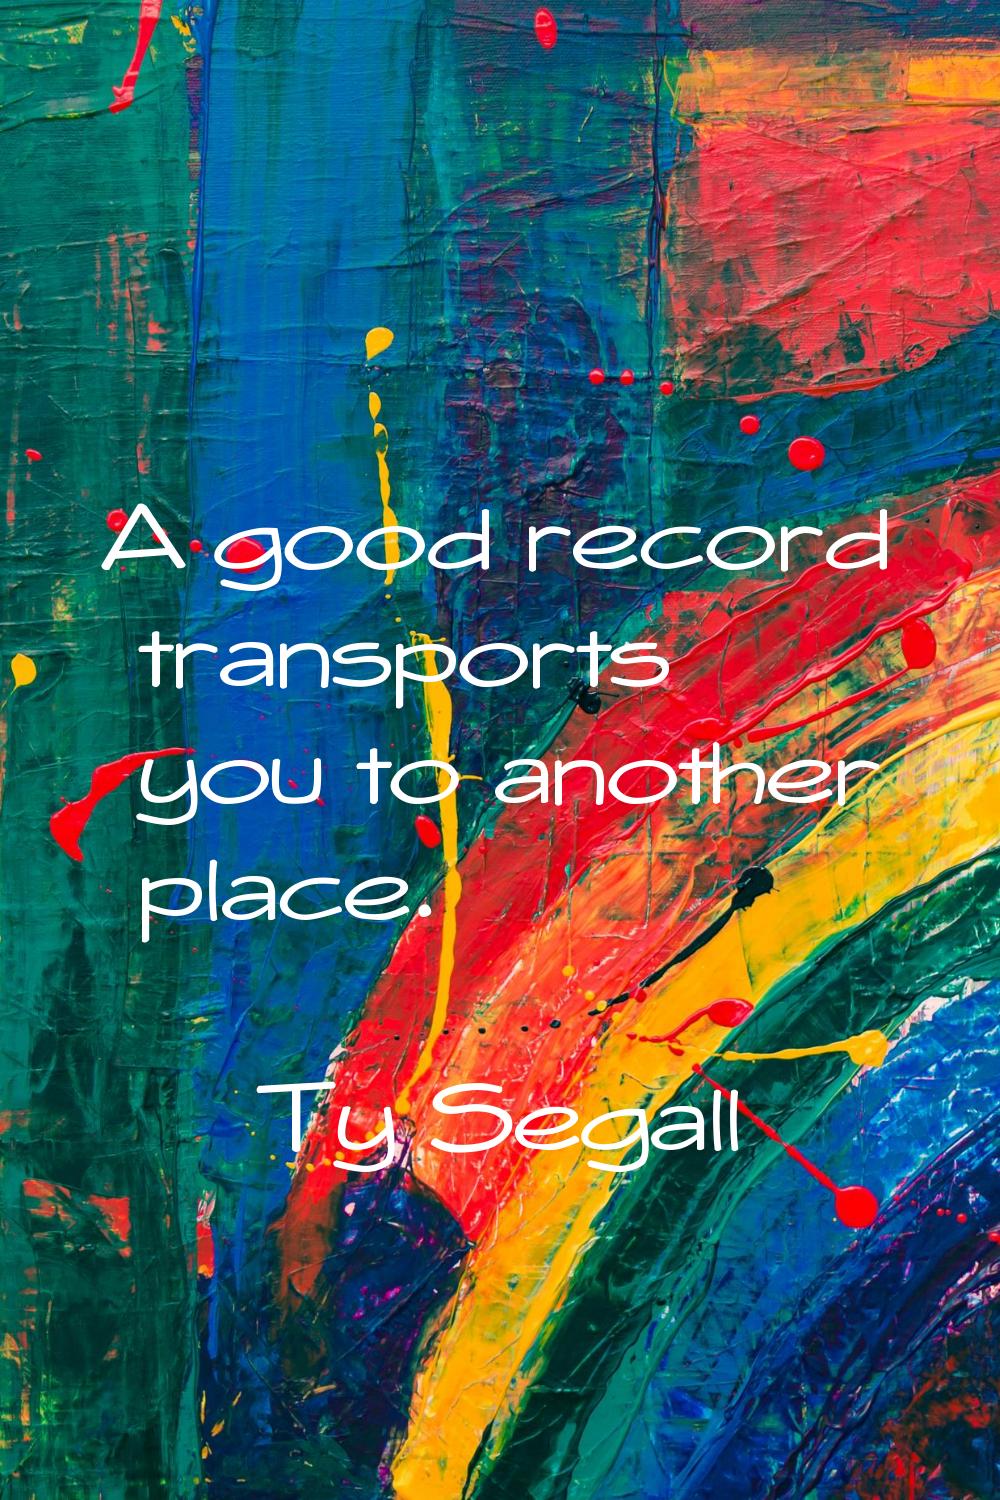 A good record transports you to another place.